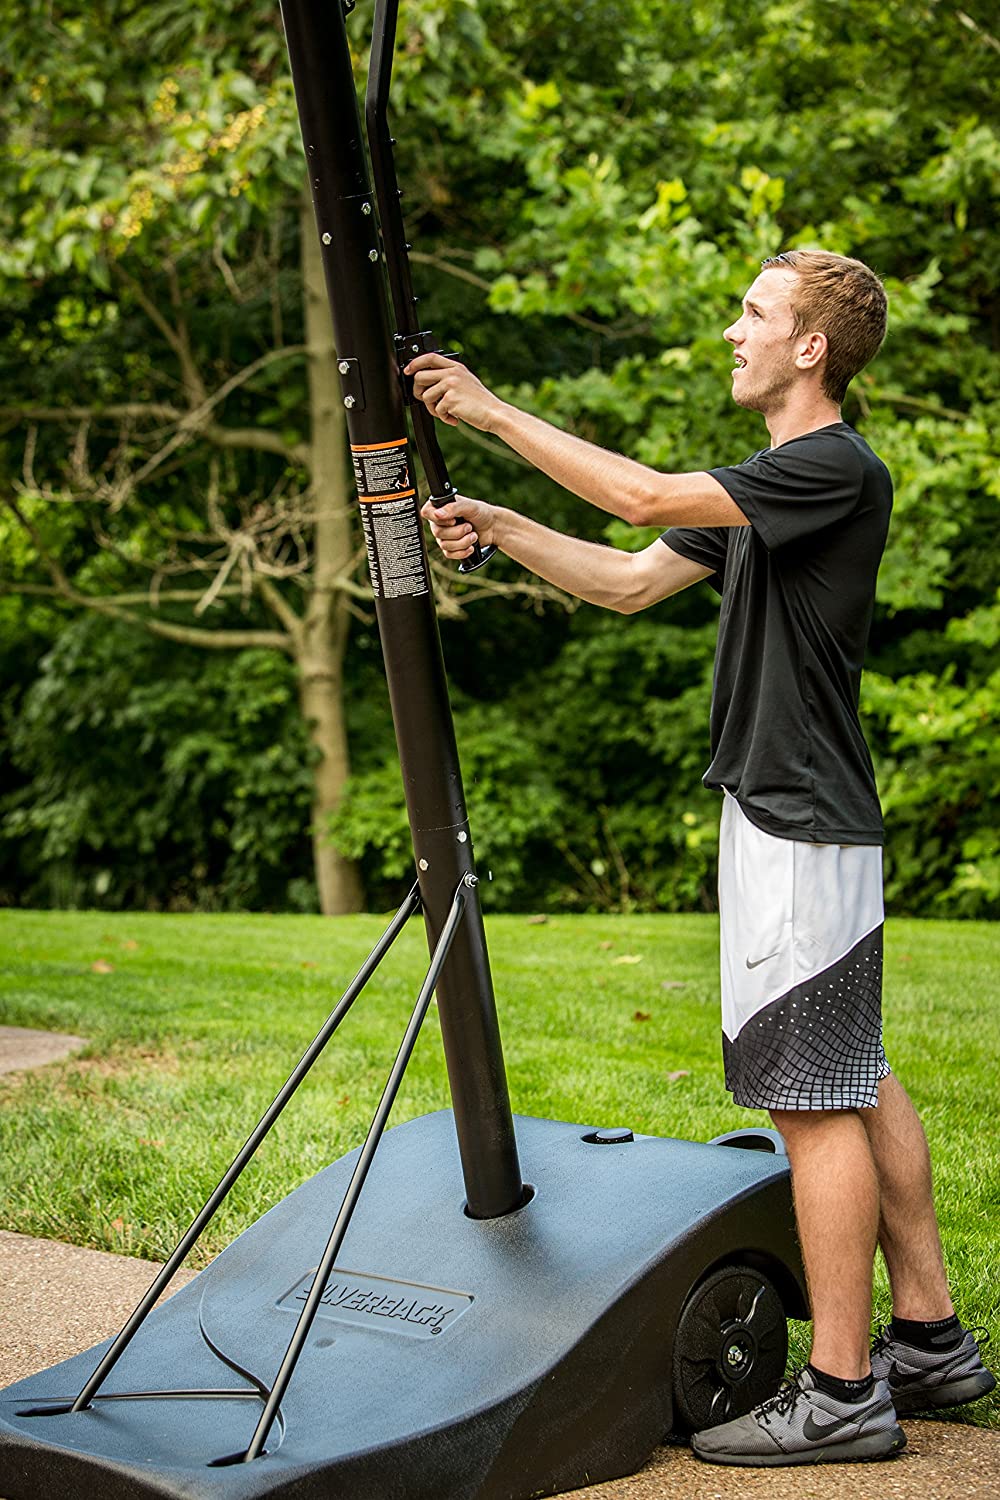 Silverback NXT 54" Backboard Portable Height-Adjustable Basketball Hoop Assembles in 90 Minutes